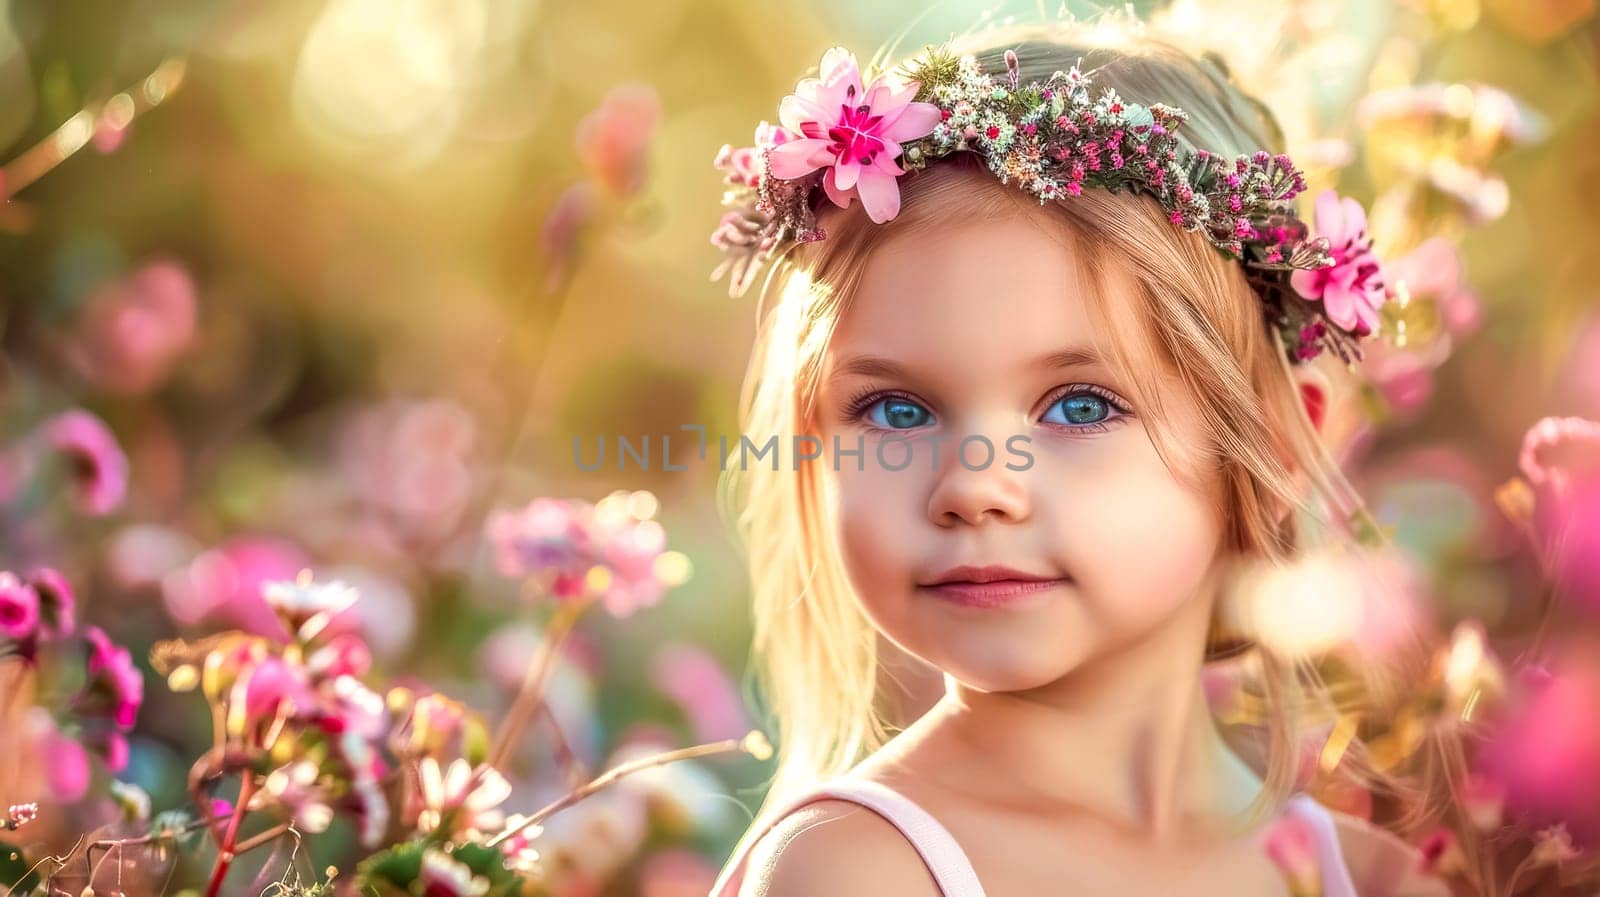 Enchanted child in floral wonderland by Edophoto